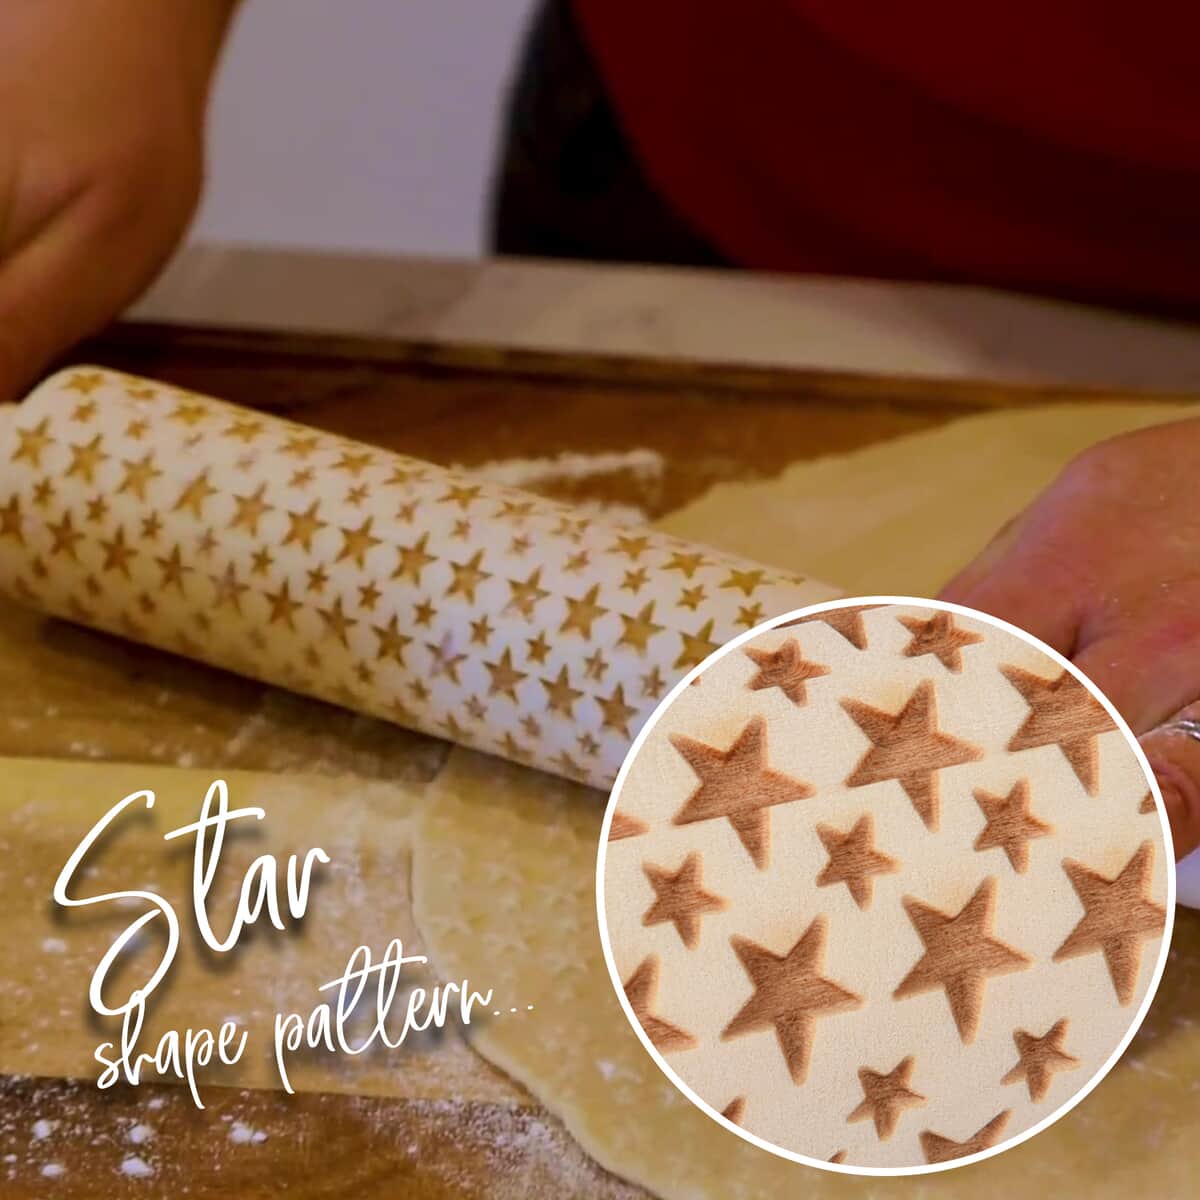 Wooden Color Star Pattern Embossed Rolling Pin image number 3